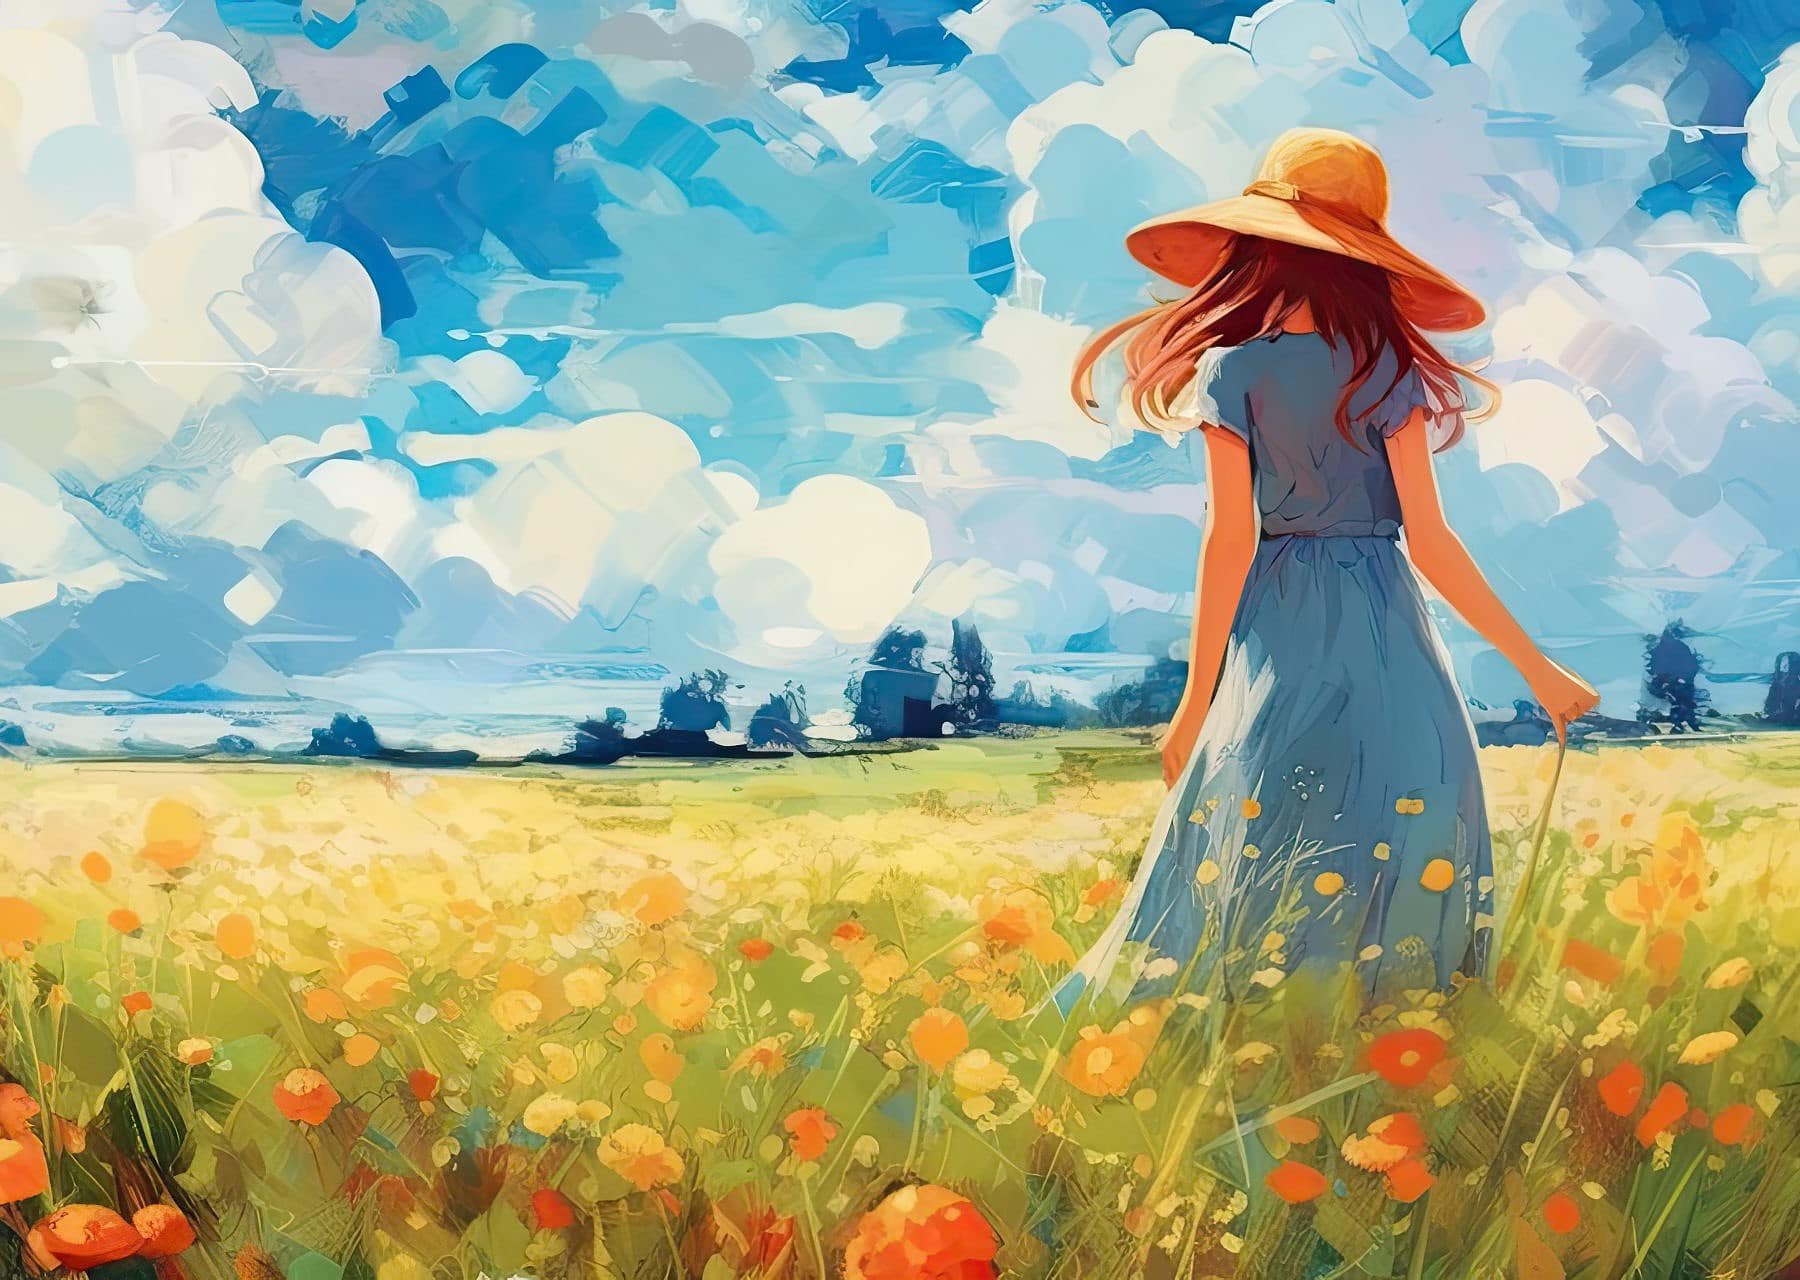 Anime impressionism with this stunning artwork. A picturesque gr